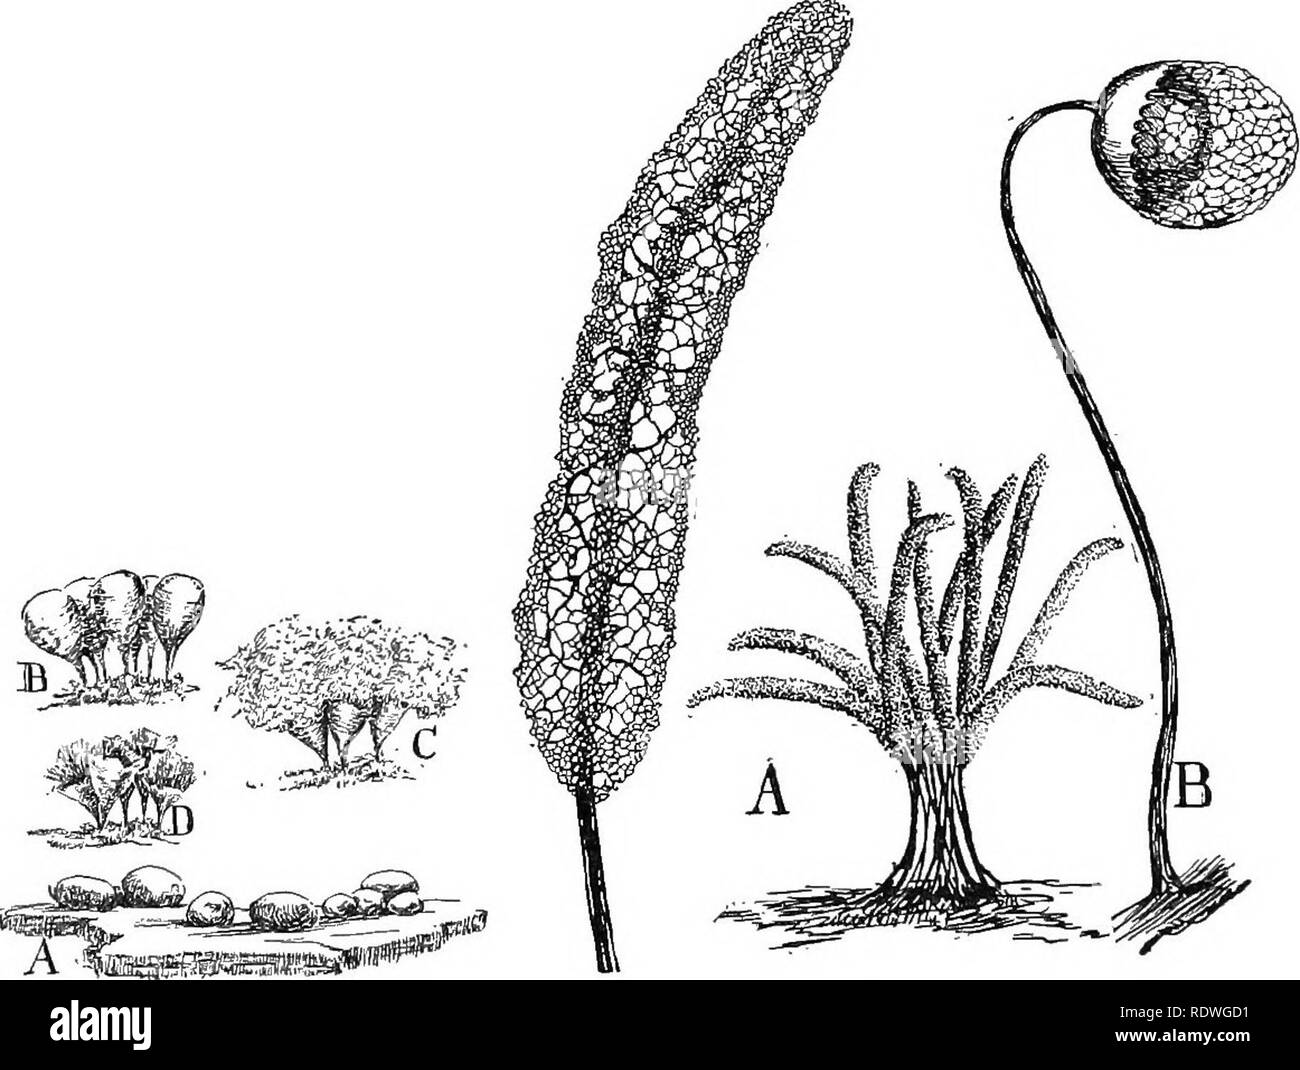 . Nature and development of plants. Botany. ISO LIFE OF A SLIME MOULD form, resembling a miniature, brownish puff ball, is often seen on stumps and fallen logs (Fig. 87). Other kinds are illustrated in Fig. 88. They range in size from scarcely a pin head to nearly a foot in diameter and from spherical to cylindrical and cake-like masses. Not infrequently they are of great beauty owing to their coloration and lace-like structures. These small sacs or spor- angia (sing, sporangium) as they are commonly called, repre- sent but one stage in the life of the slime moulds. If we begin with an examina Stock Photo